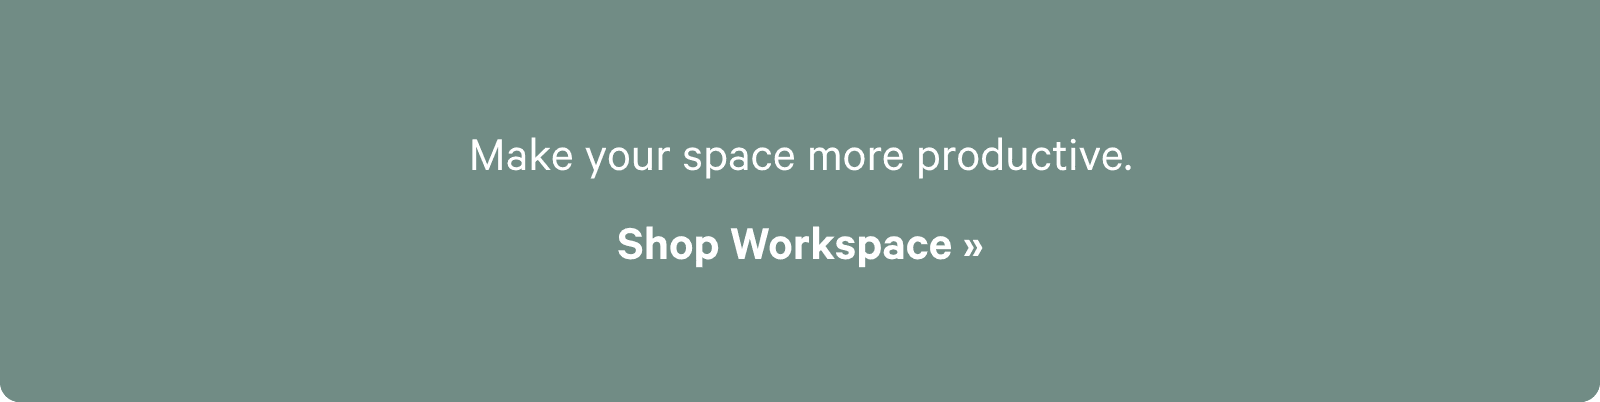 Make your space more productive. Shop Workspace ?